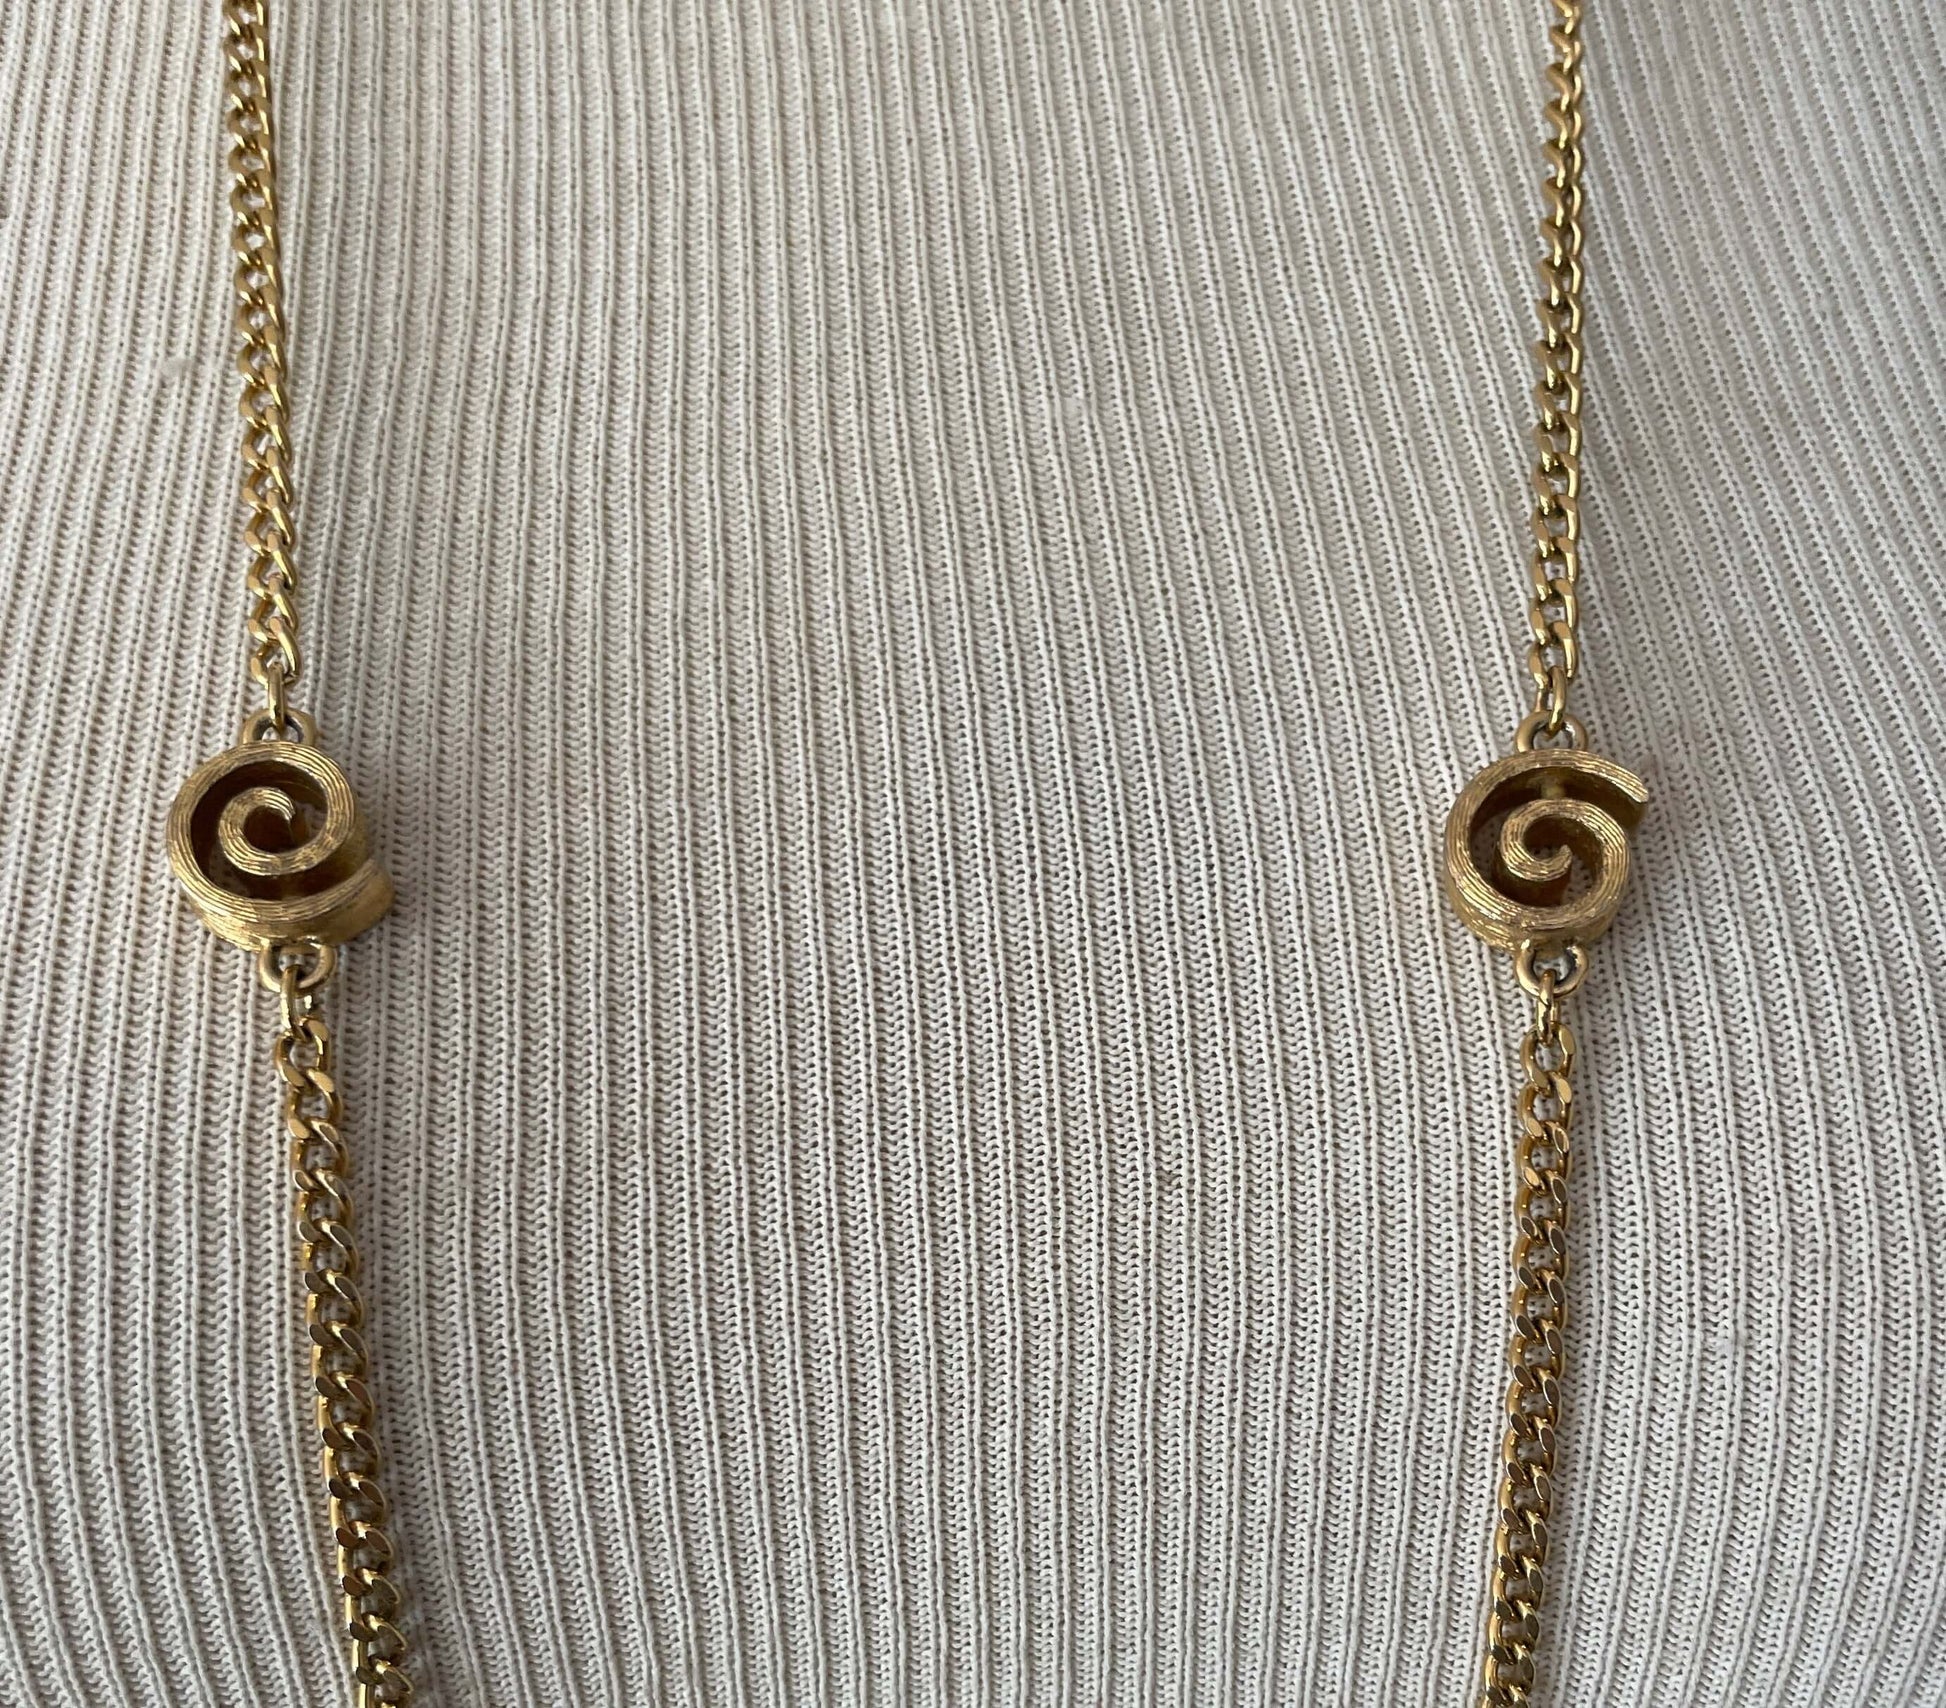  1980s Signed Monet Gold Tone Long Chain Spiral Vintage Wrap Necklace